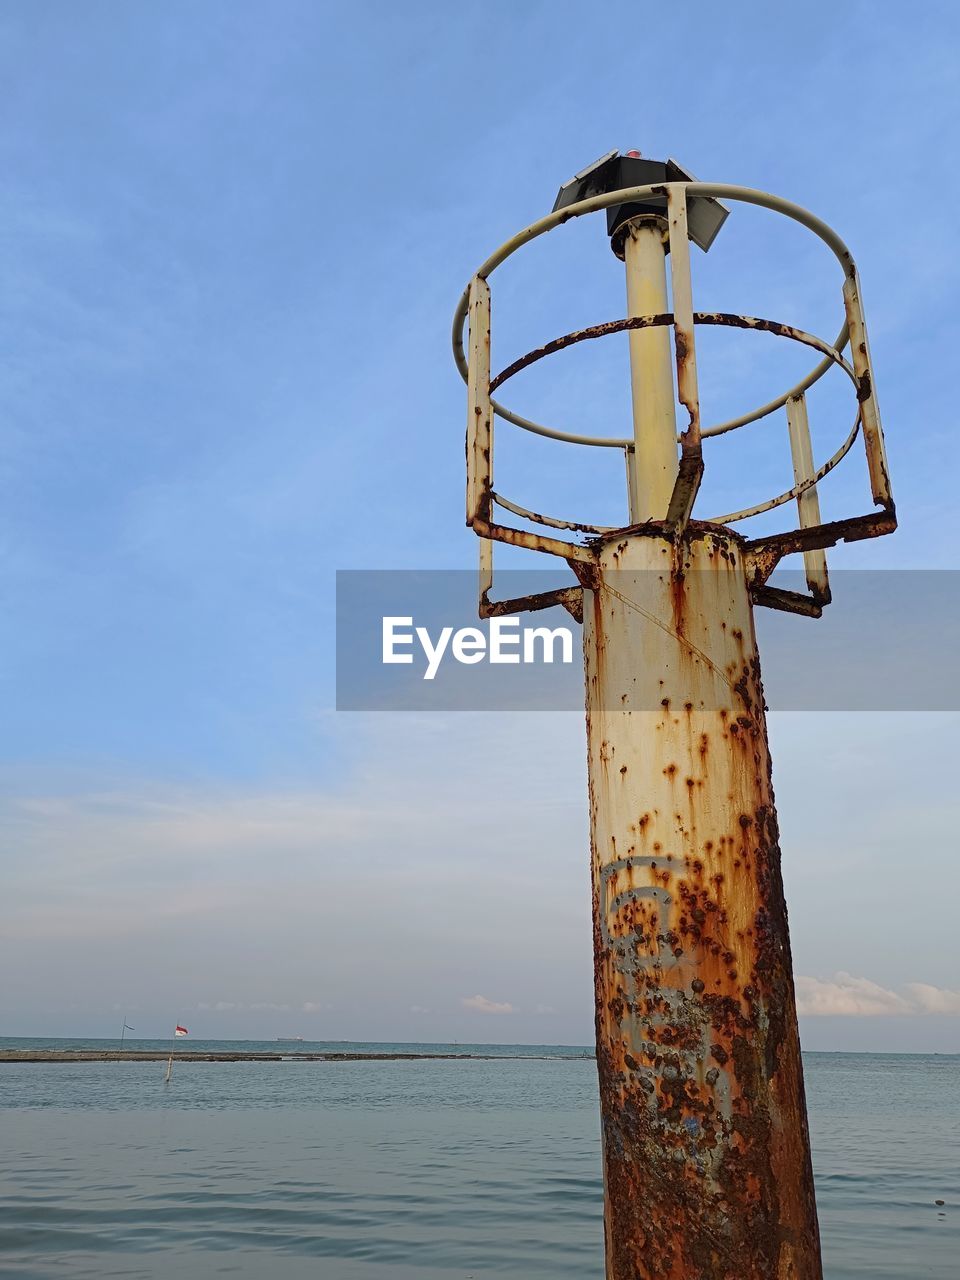 sky, water, tower, sea, nature, no people, blue, beach, day, land, ocean, horizon over water, outdoors, scenics - nature, horizon, wind, coast, cloud, tranquility, metal, beauty in nature, wood, tranquil scene